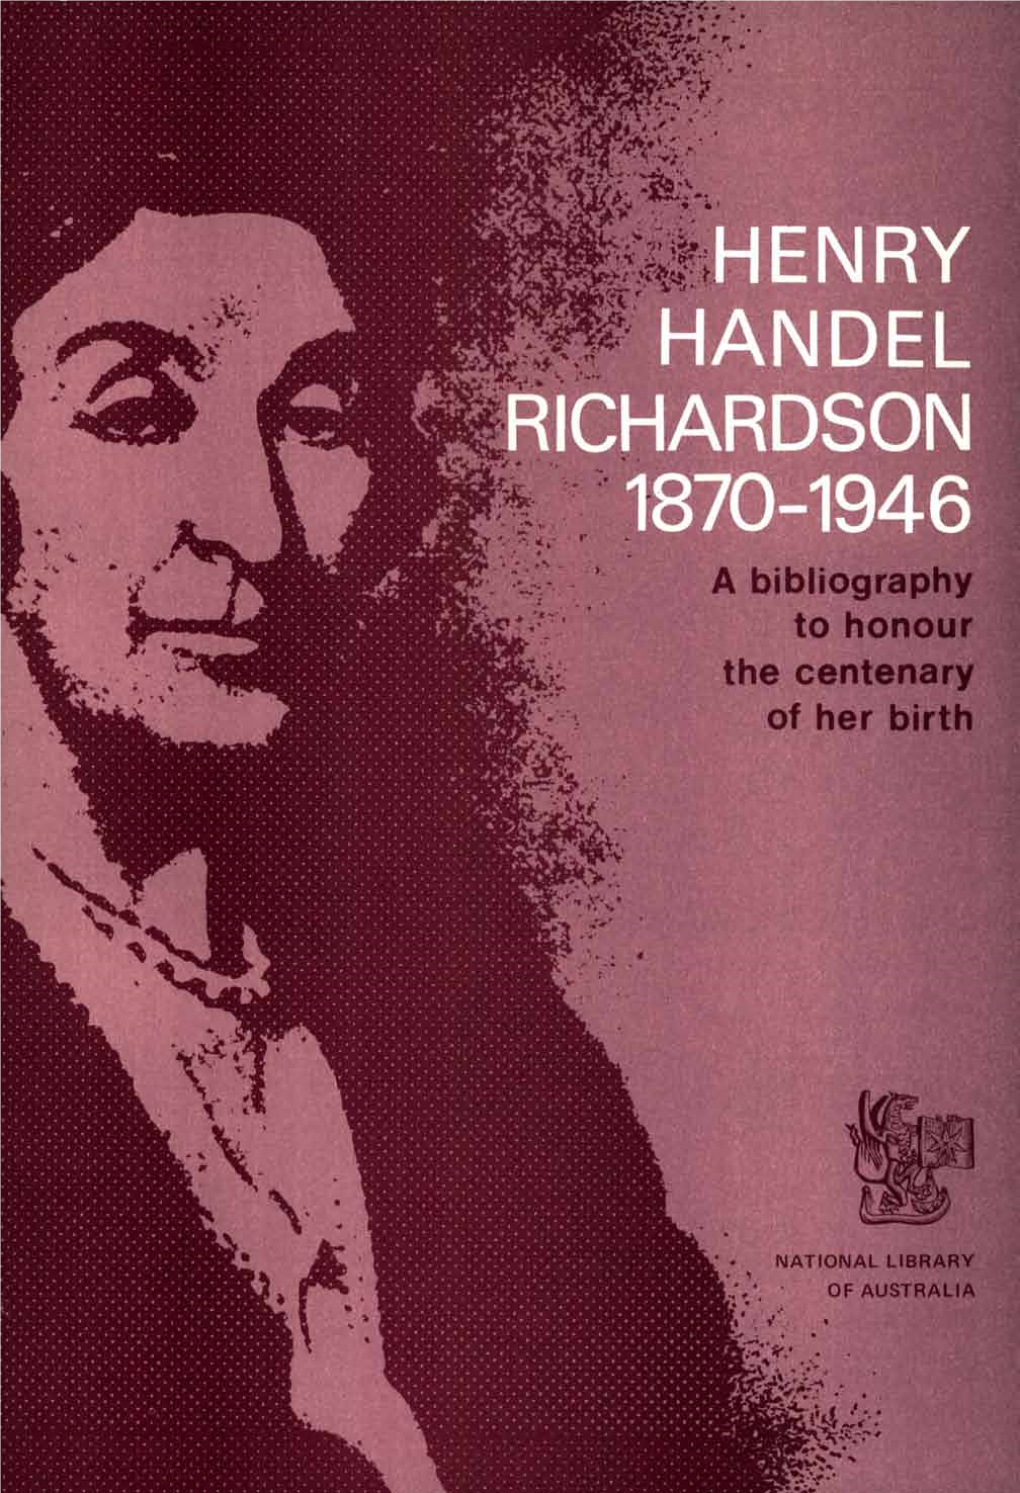 HENRY HANDEL RICHARDSON 1870-1946 a Bibliography to Honour the Centenary of Her Birth